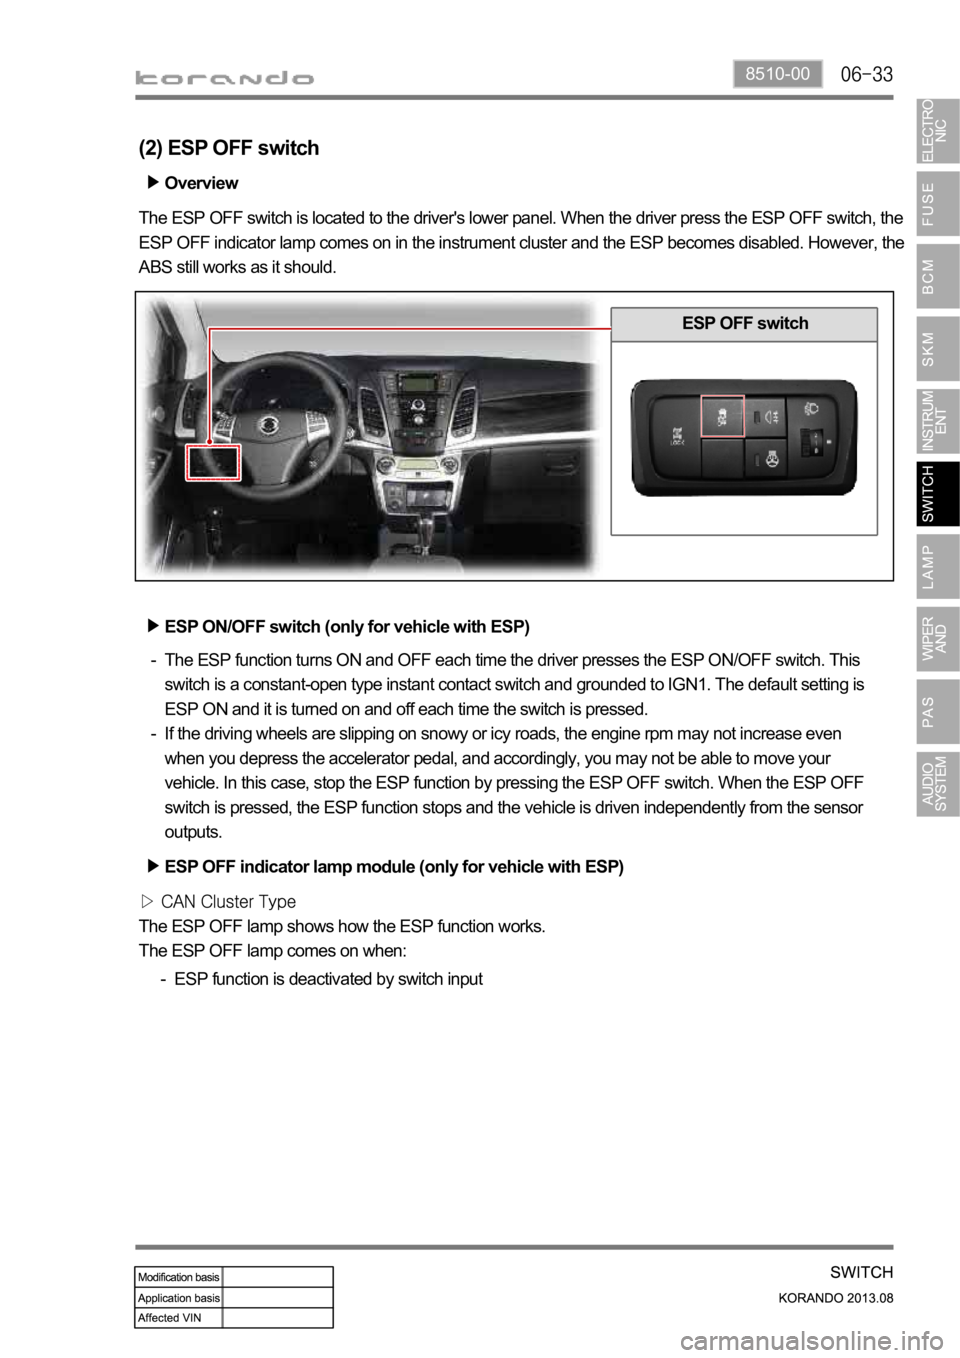 SSANGYONG KORANDO 2013  Service Manual 8510-00
Overview
The ESP OFF switch is located to the driver's lower panel. When the driver press the ESP OFF switch, the 
ESP OFF indicator lamp comes on in the instrument cluster and the ESP bec